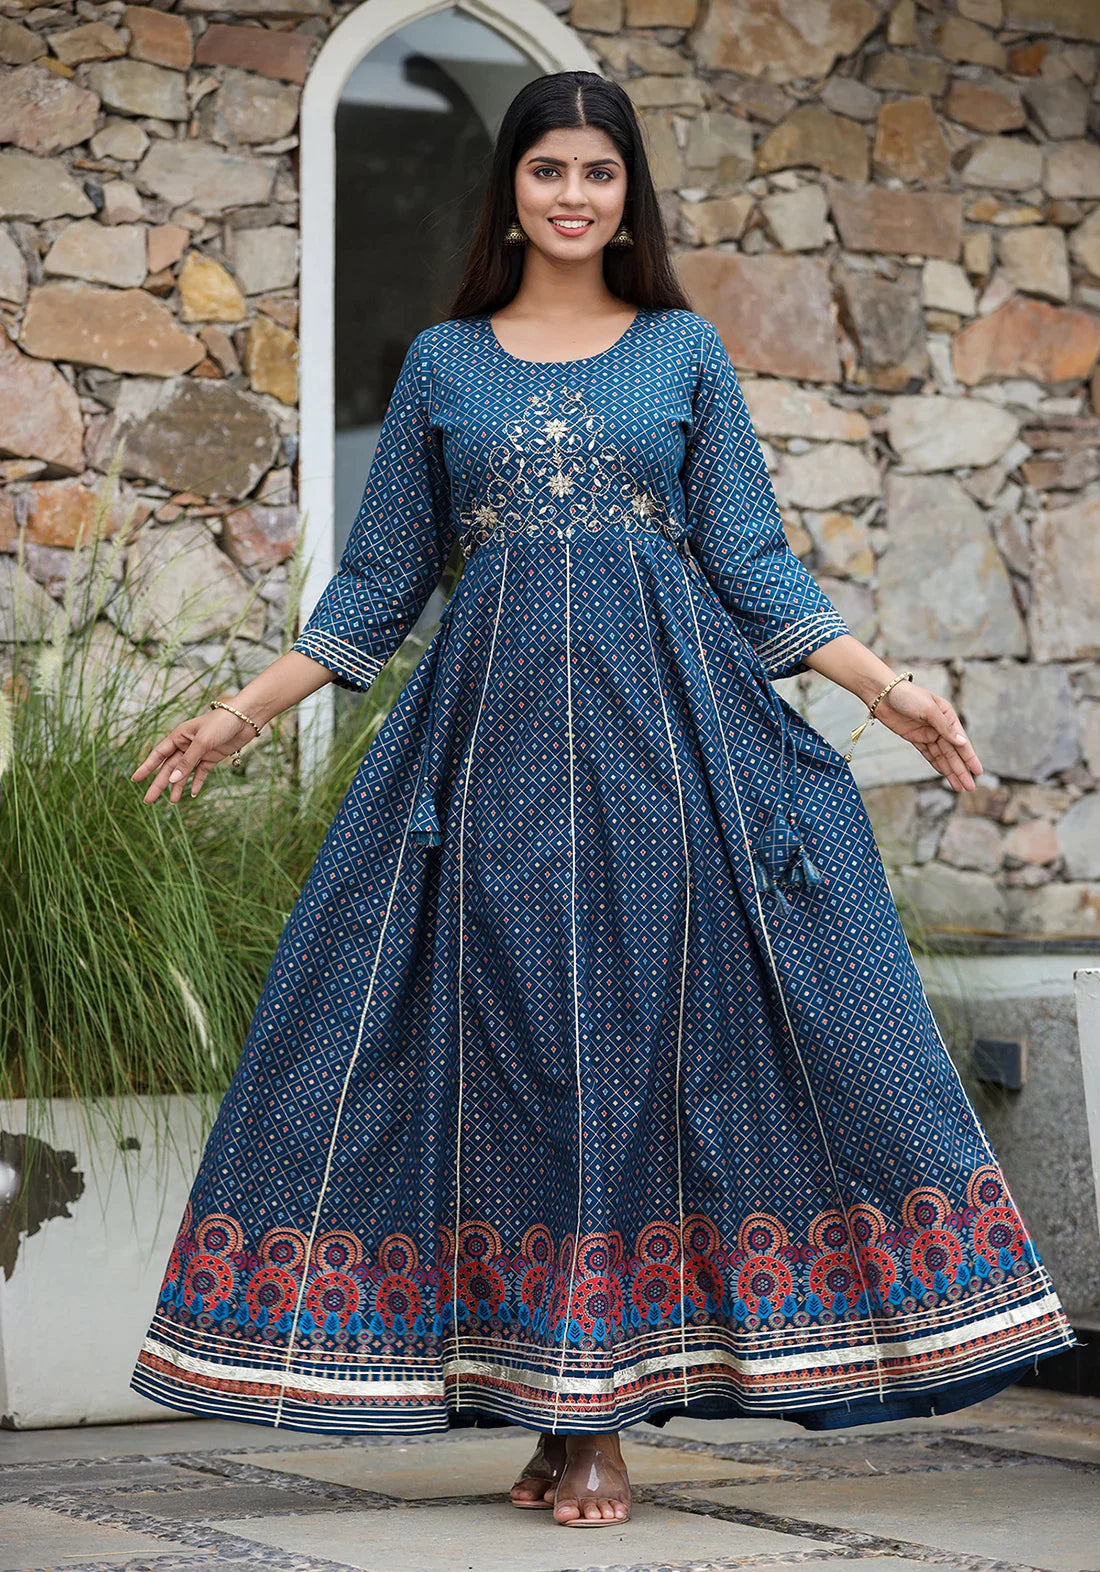 Indian Dress Navy Blue Floral Printed Liva Kurta With Trousers & Dupatta  Kurta Sets for Women Wedding / Party 3 Piece Suit - Etsy